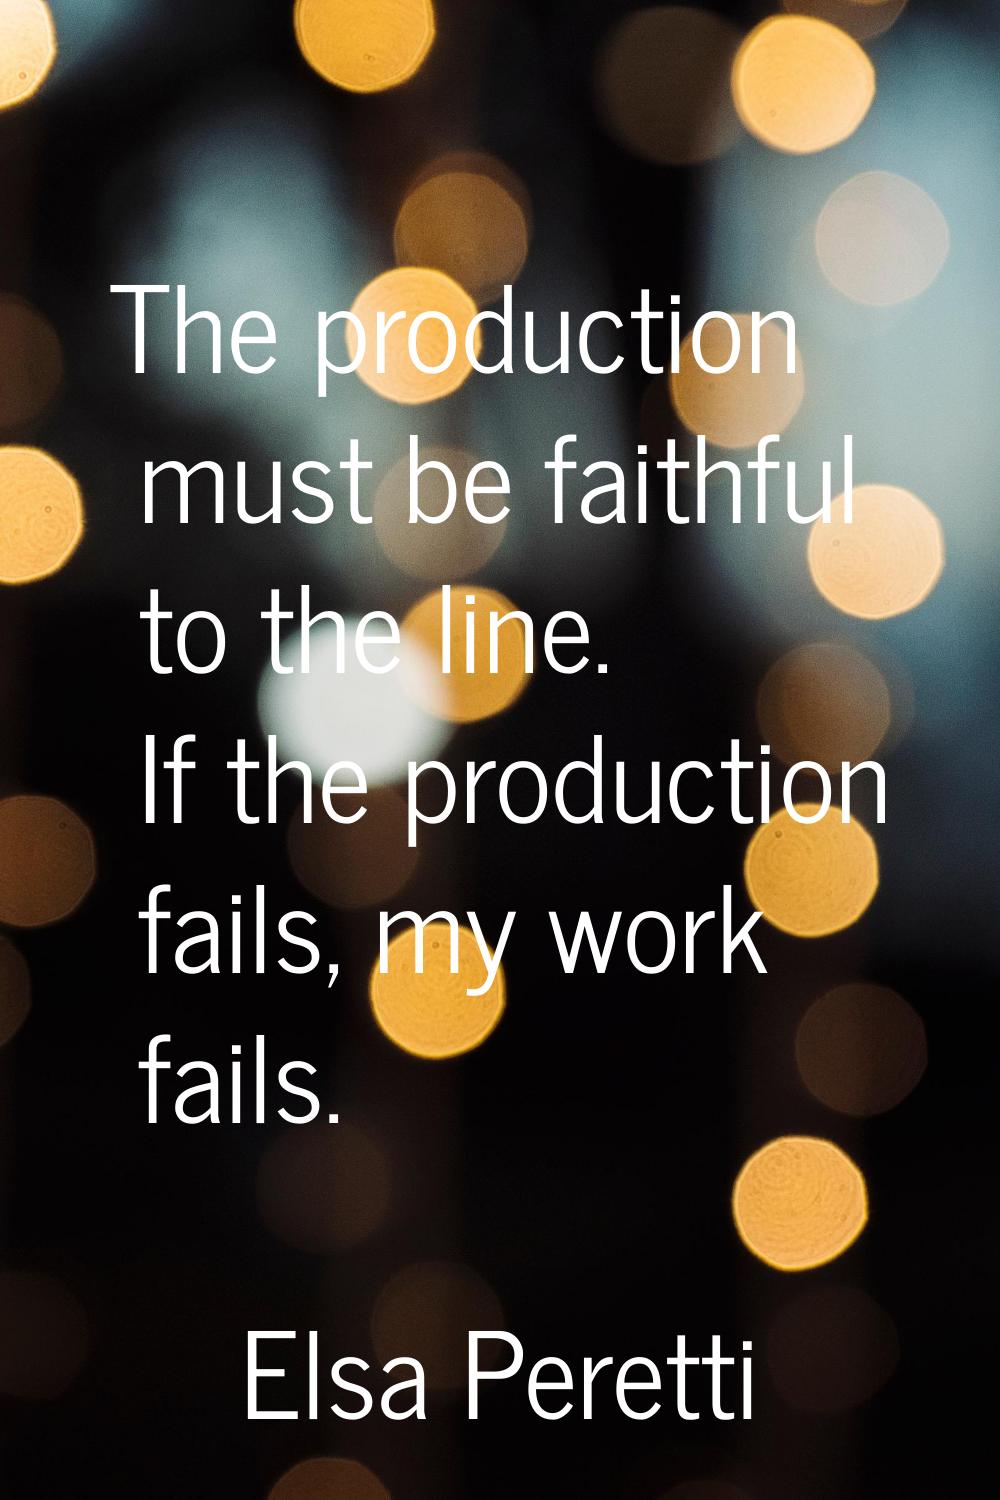 The production must be faithful to the line. If the production fails, my work fails.